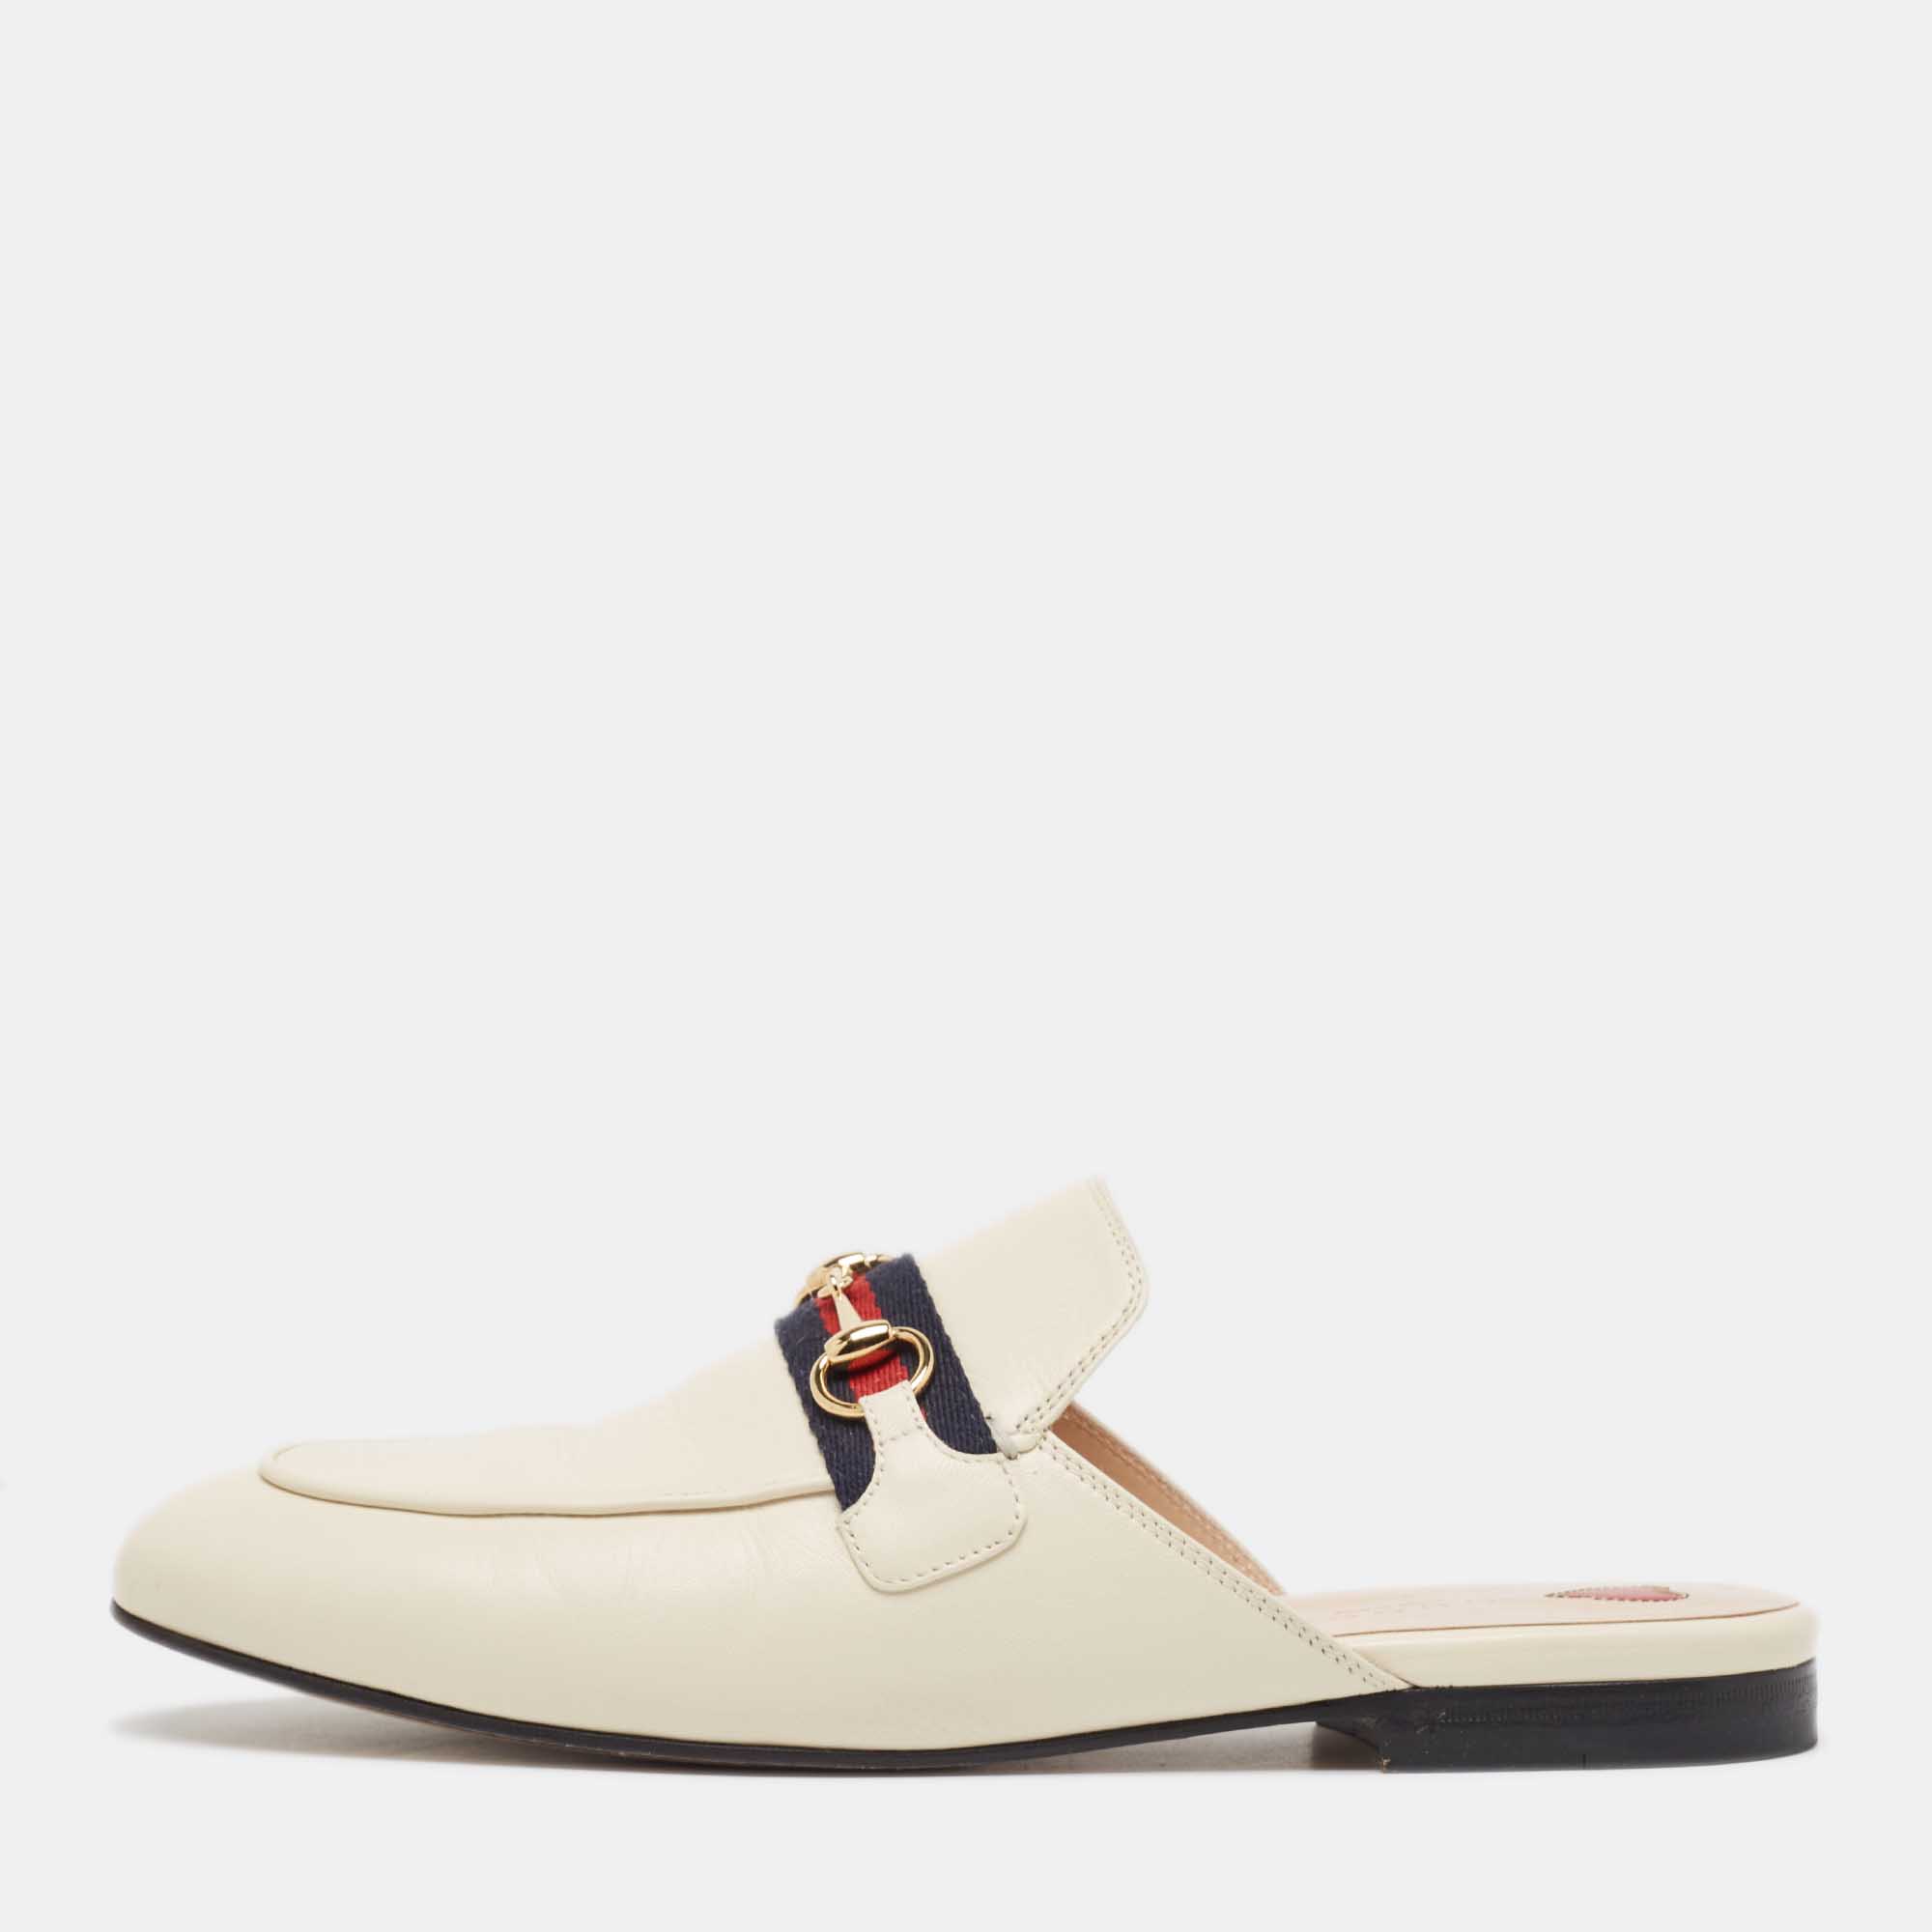 Gucci cream leather  princetown mules size 39